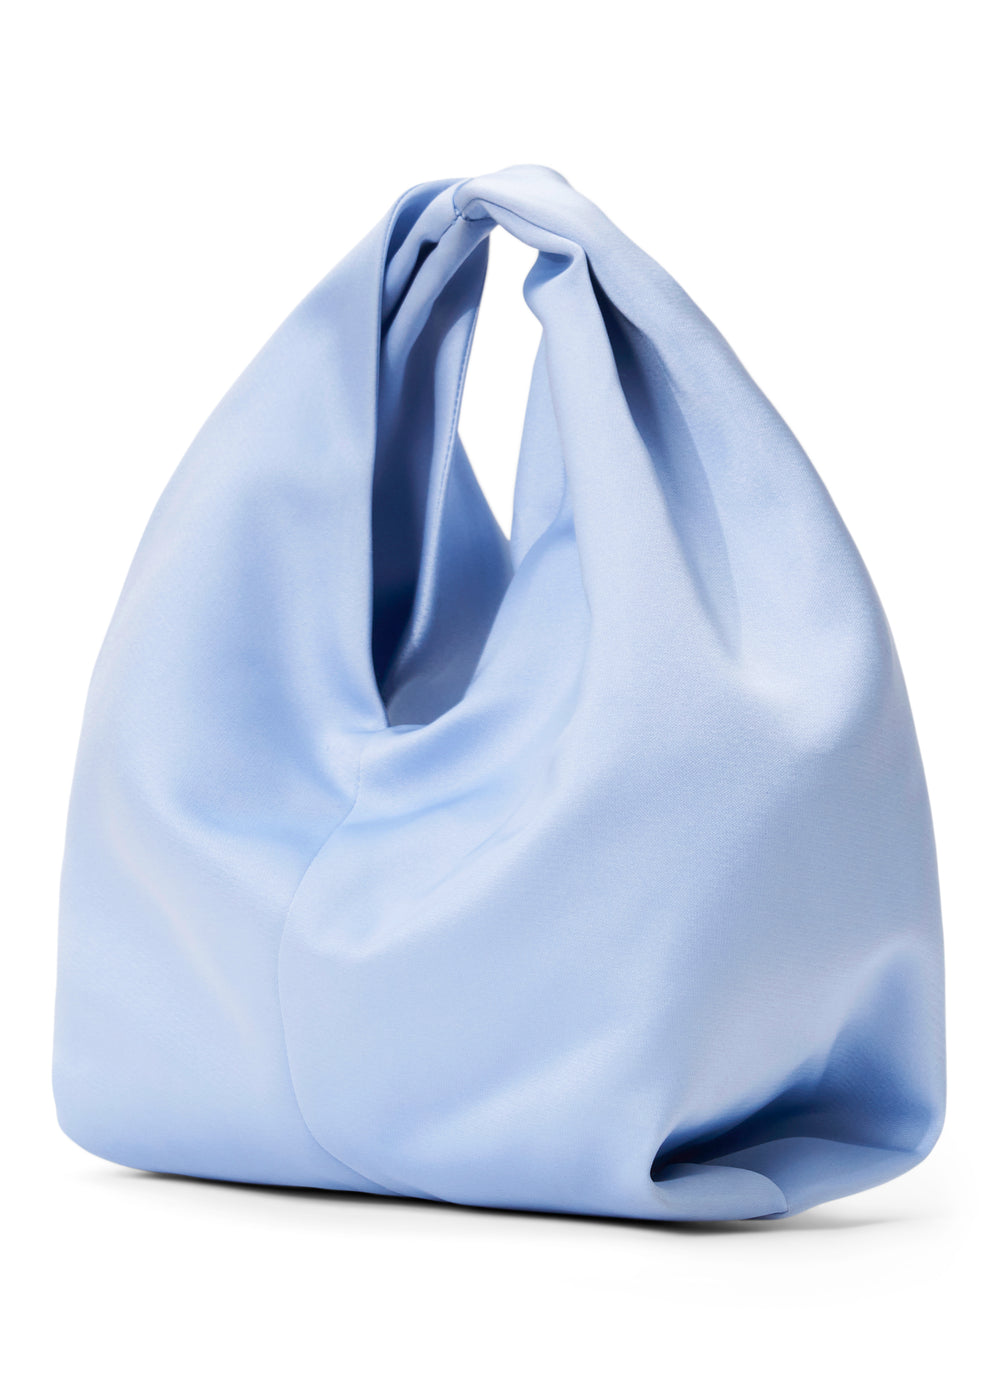 Flat lay view of light blue satin  bag with short top handle and rectangular base